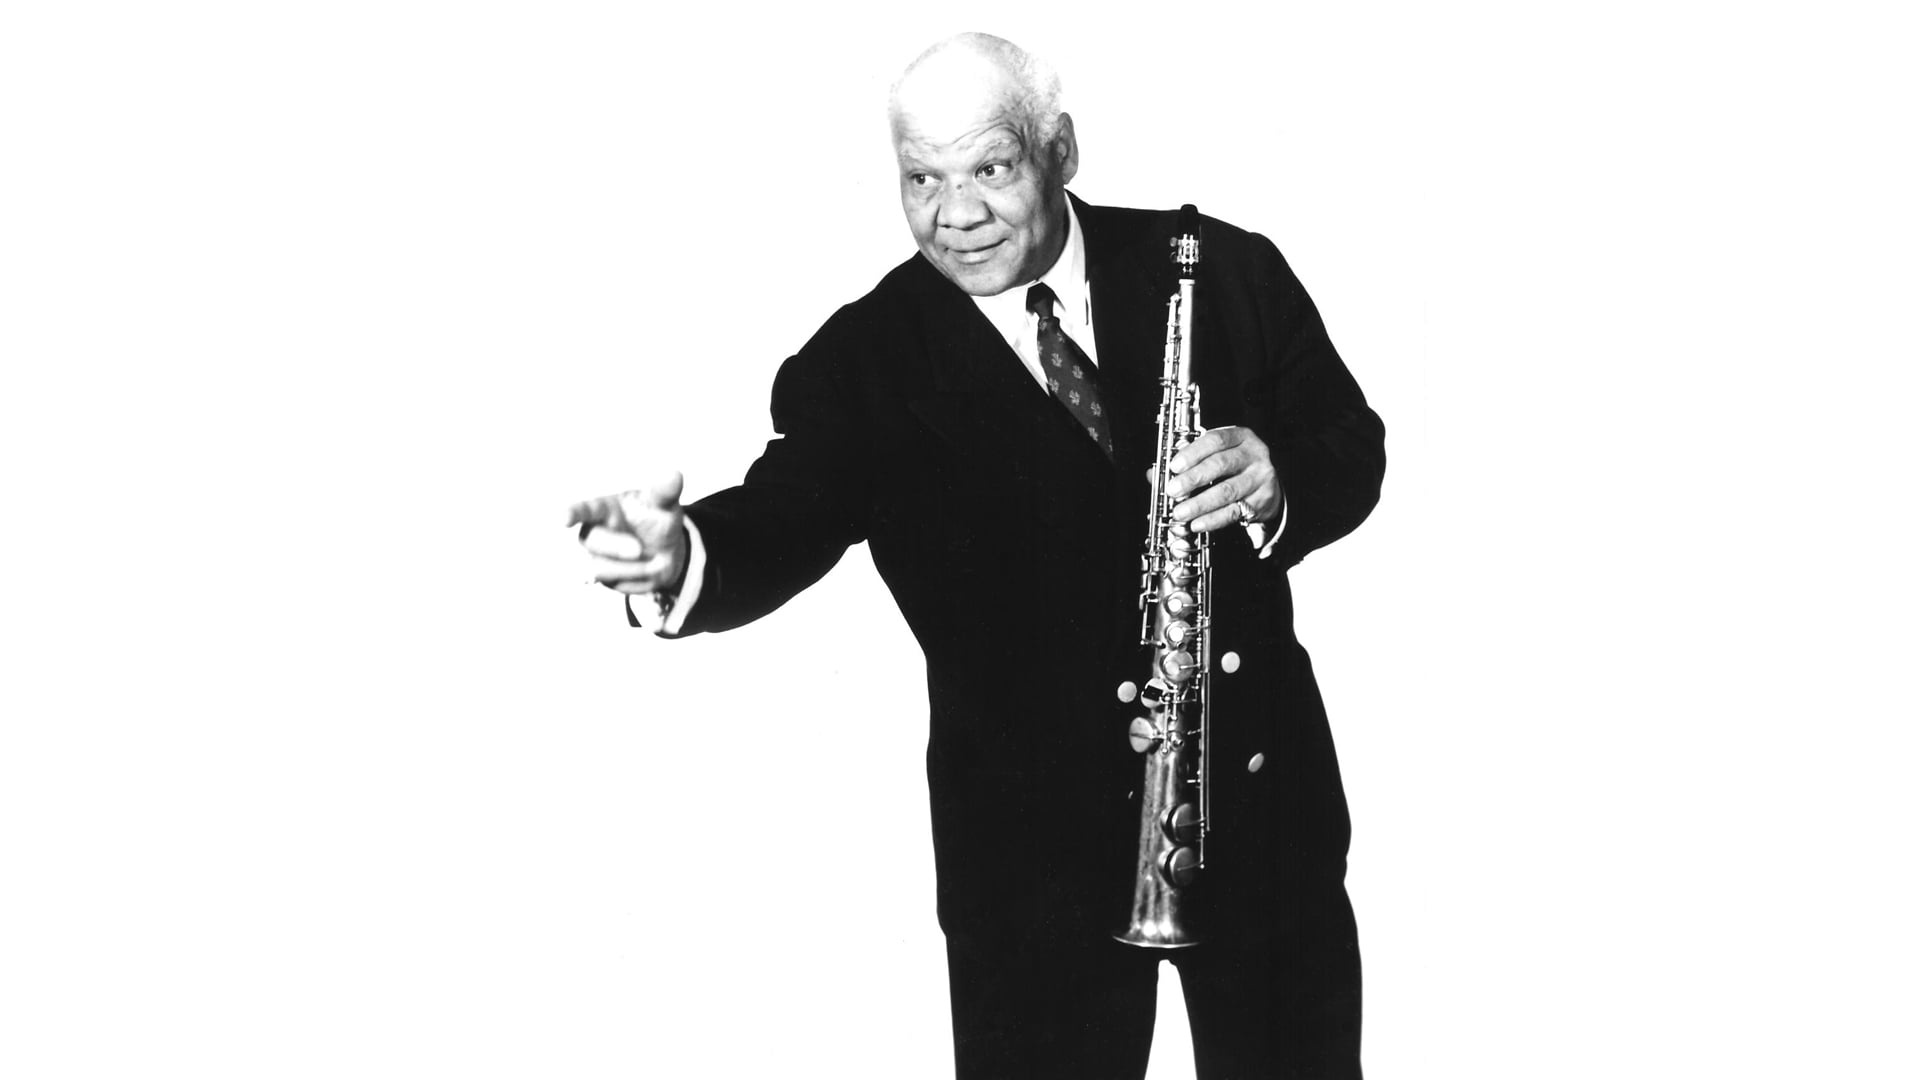 Clarinet: Sidney Bechet, An American jazz saxophonist, clarinetist, and composer, The Swing style of jazz. 1920x1080 Full HD Wallpaper.